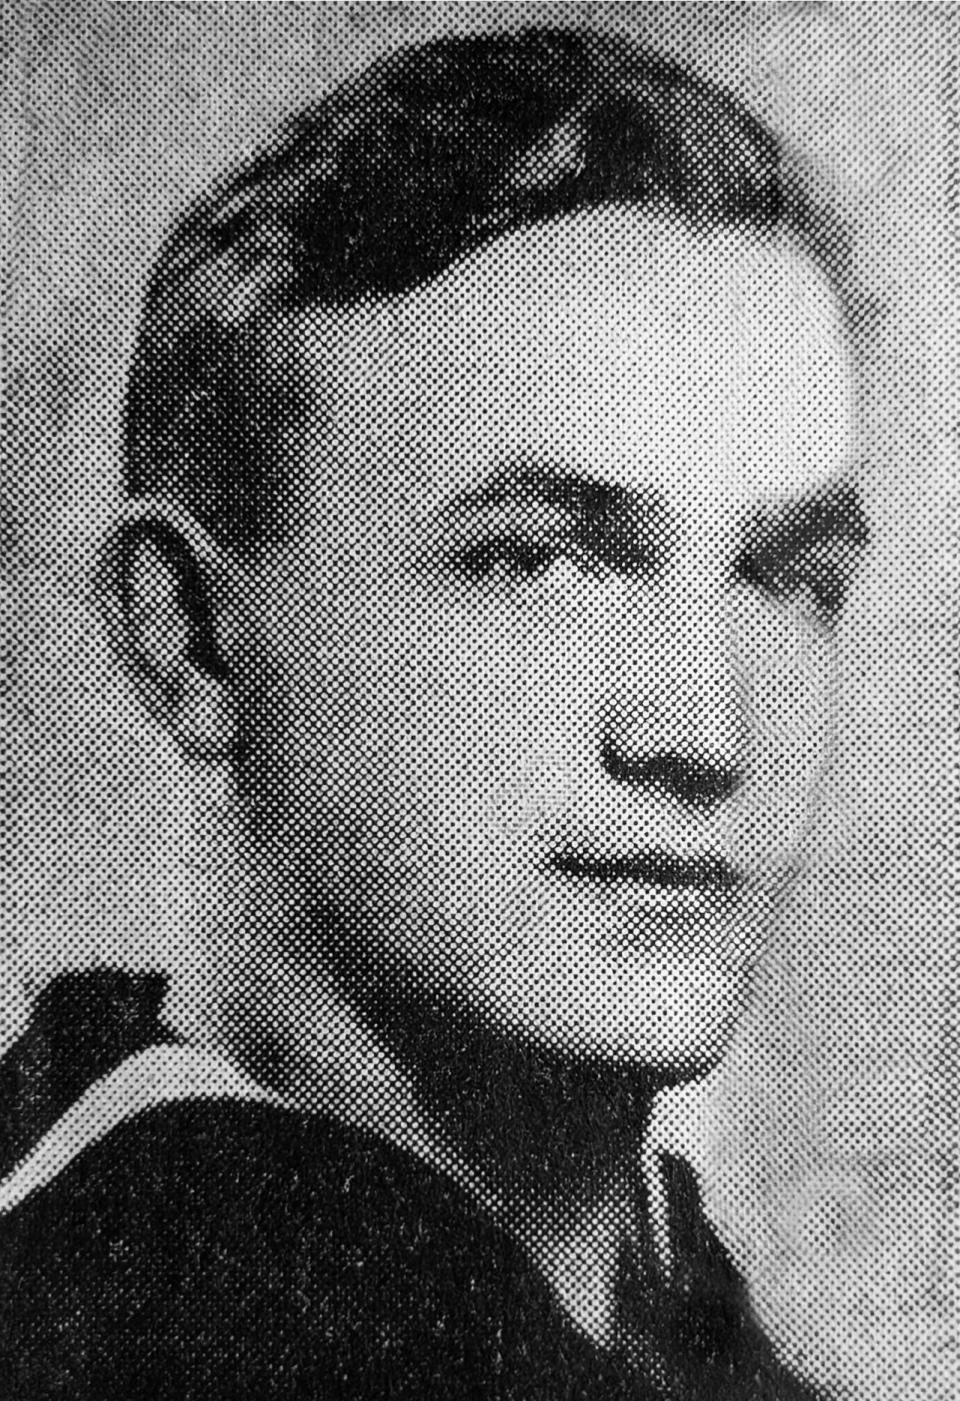 Frank Hryniewicz, a 20-year-old soldier killed on the USS Oklahoma in Japan's attack on Pearl Harbor, was to be reinterred at Arlington National Cemetery on May 16.
(Credit: Hryniewicz Family)